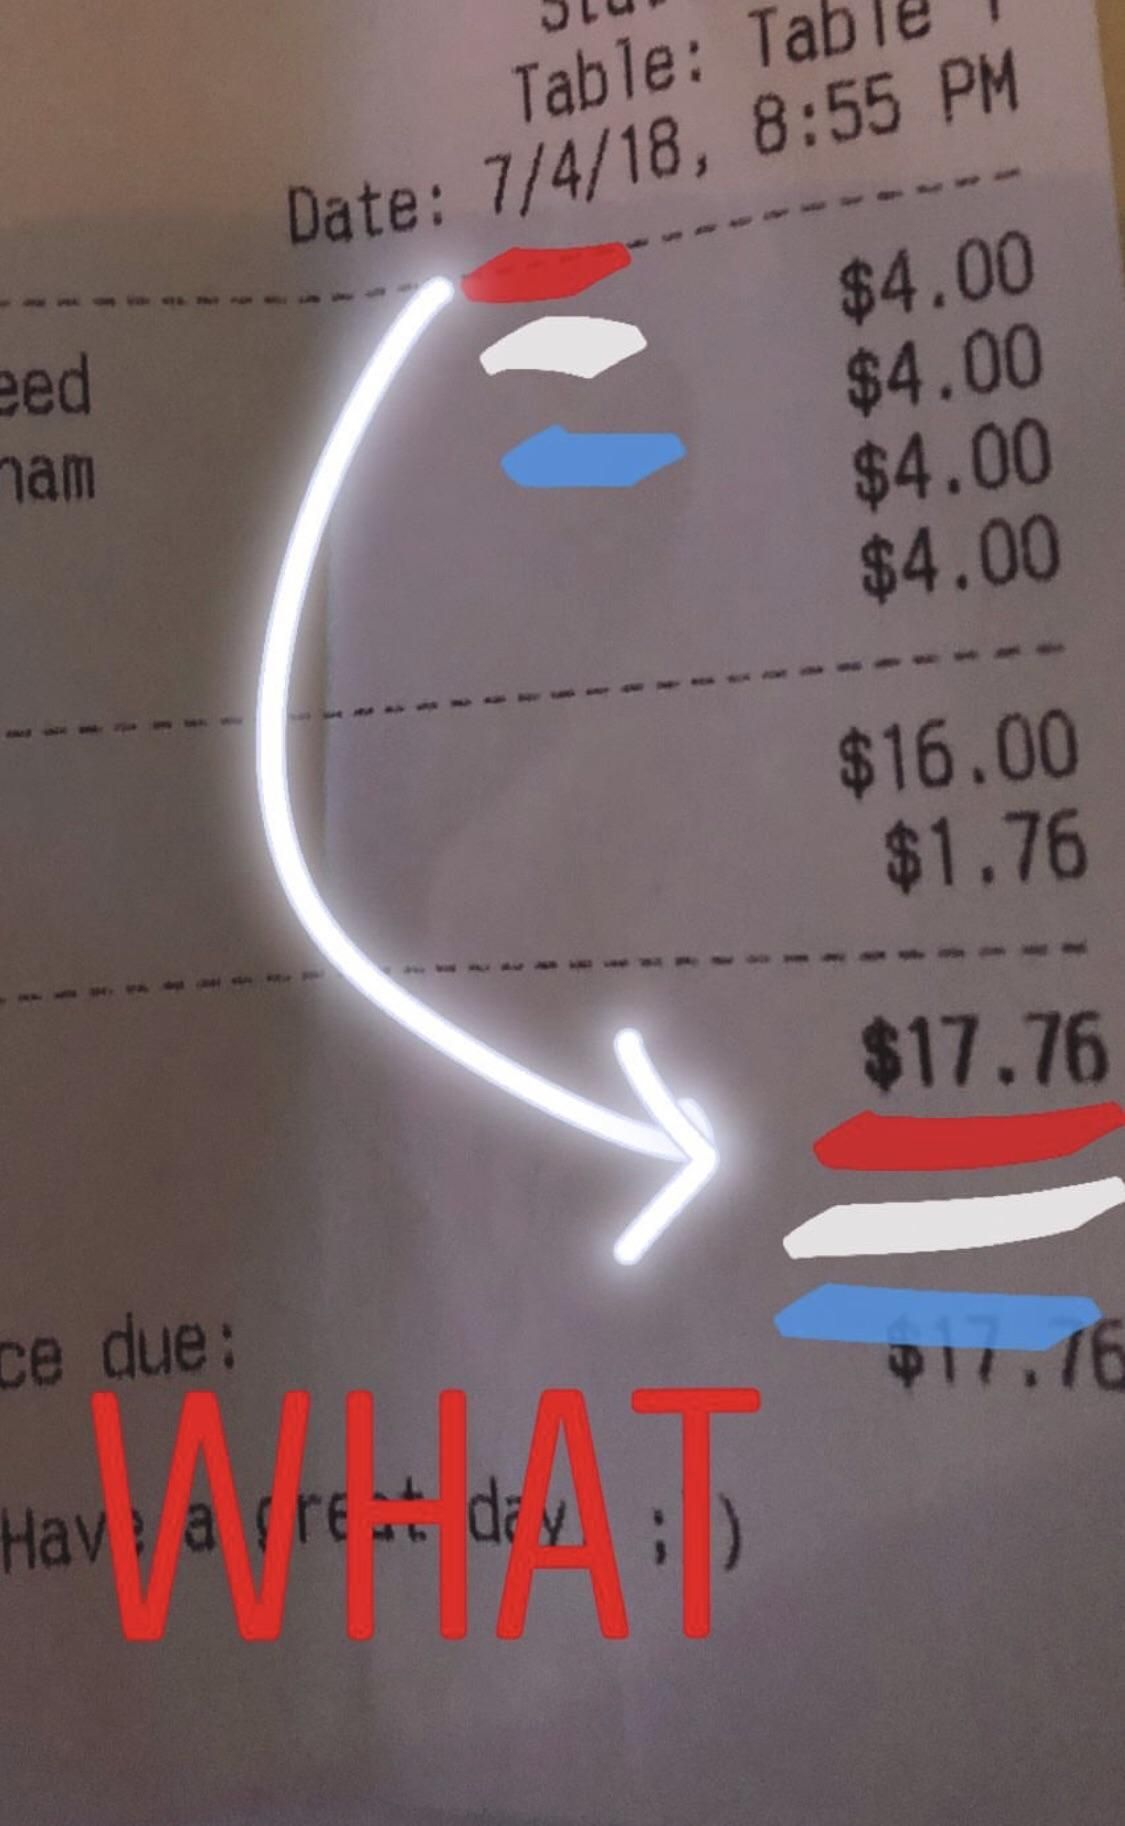 We got the most 4th of July Bar tab tonight